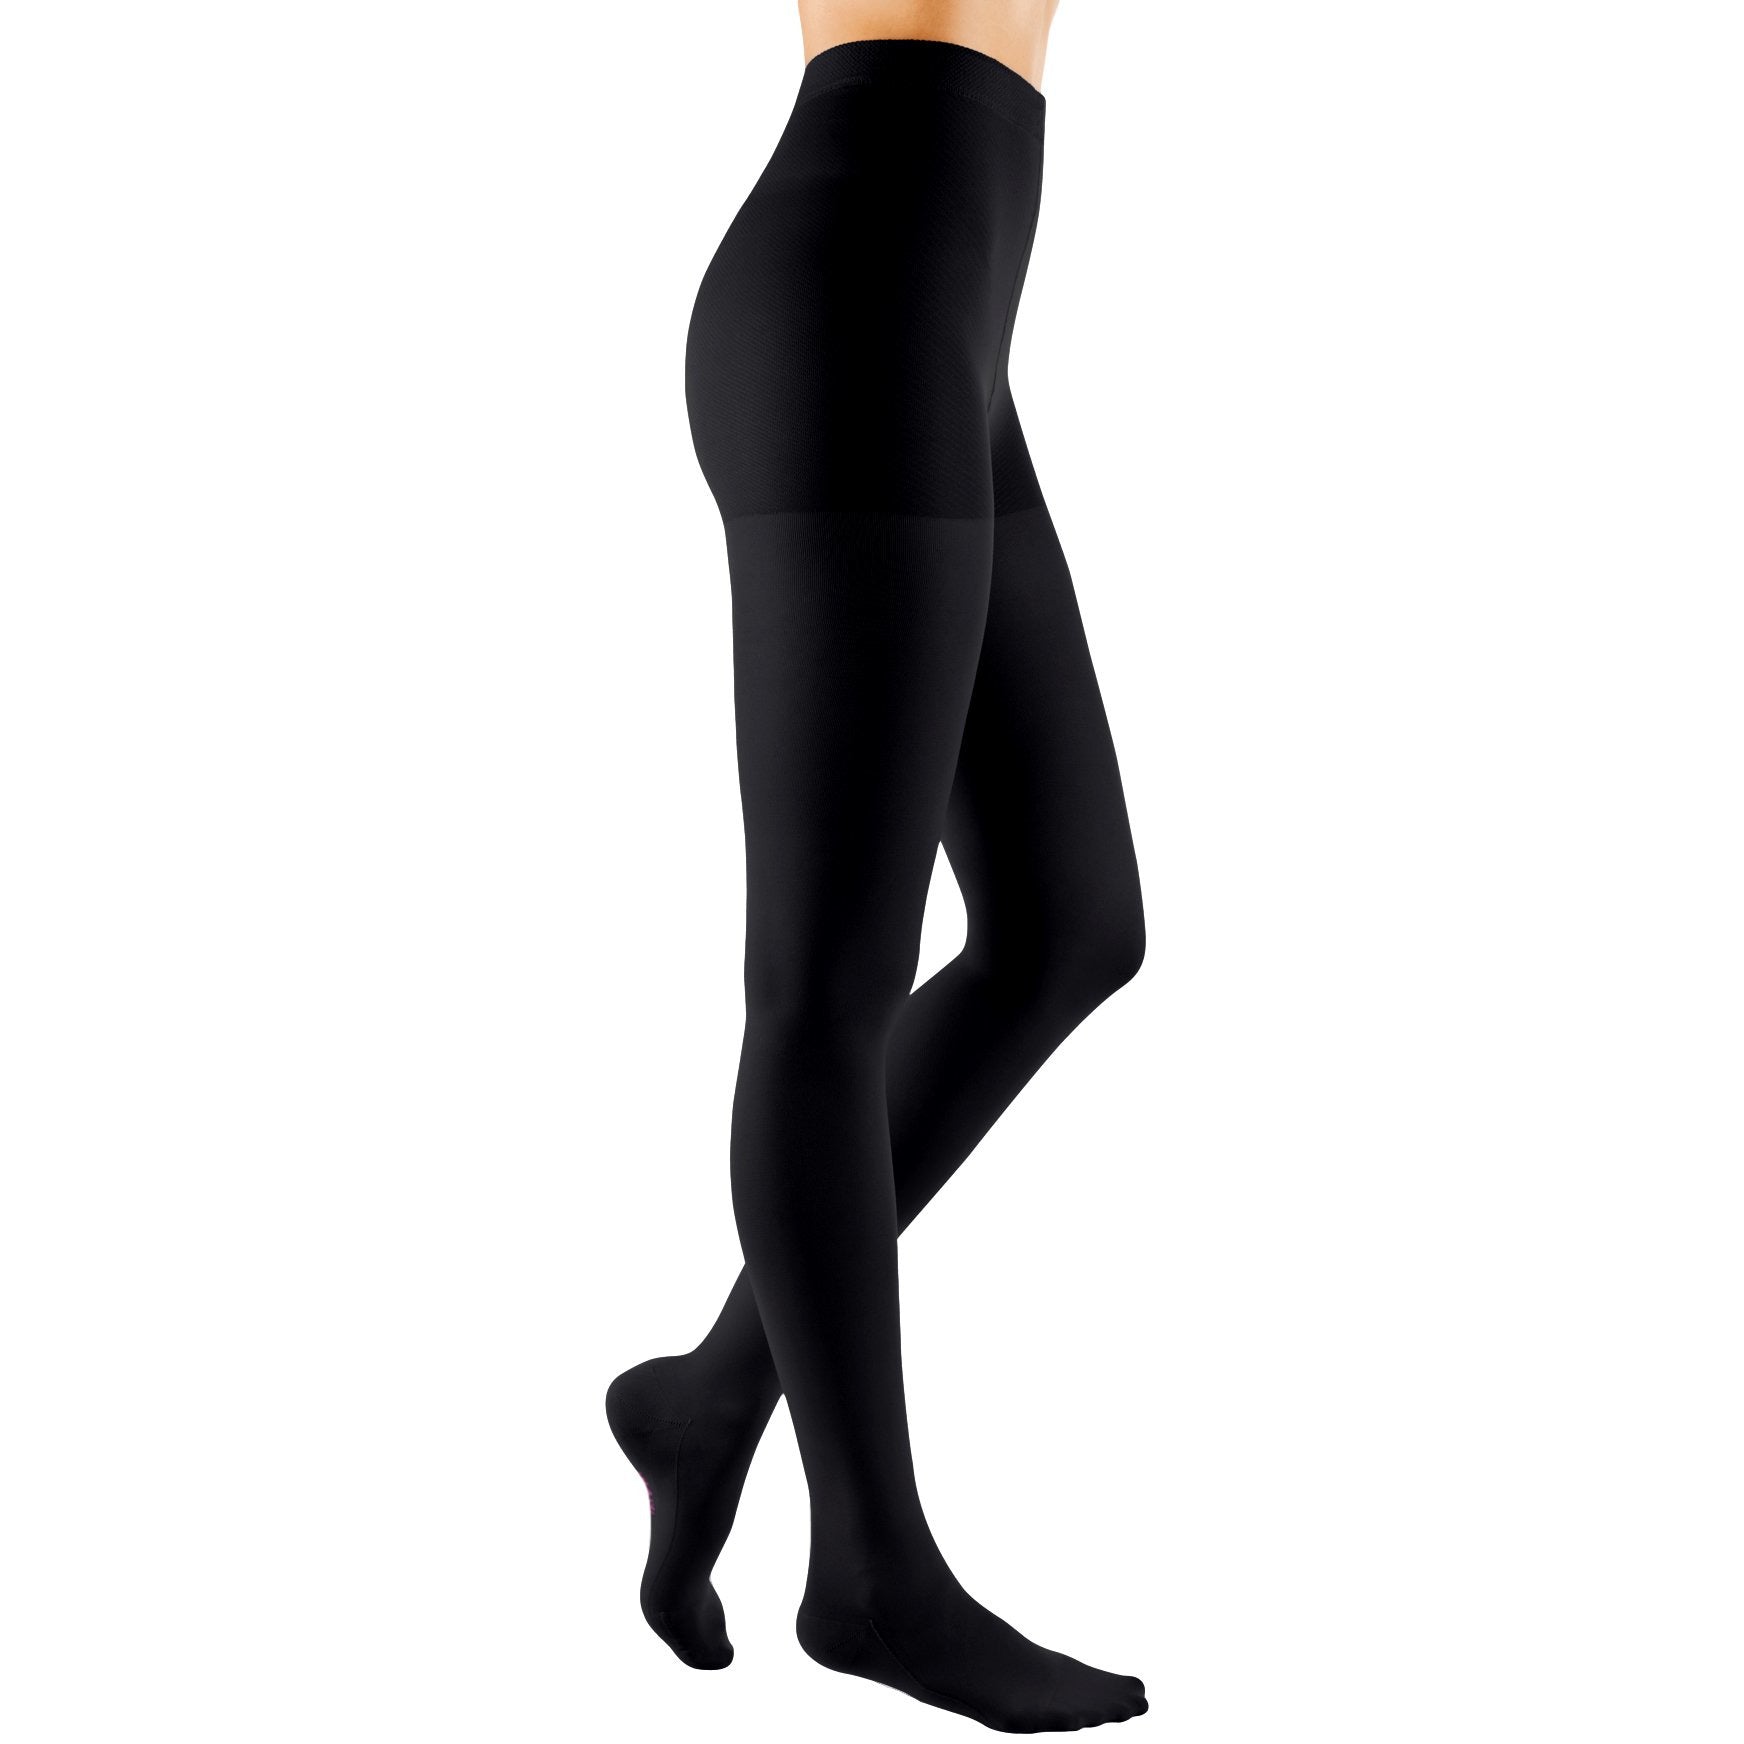 How Maternity Compression Garments Help During Pregnancy & Postpartum